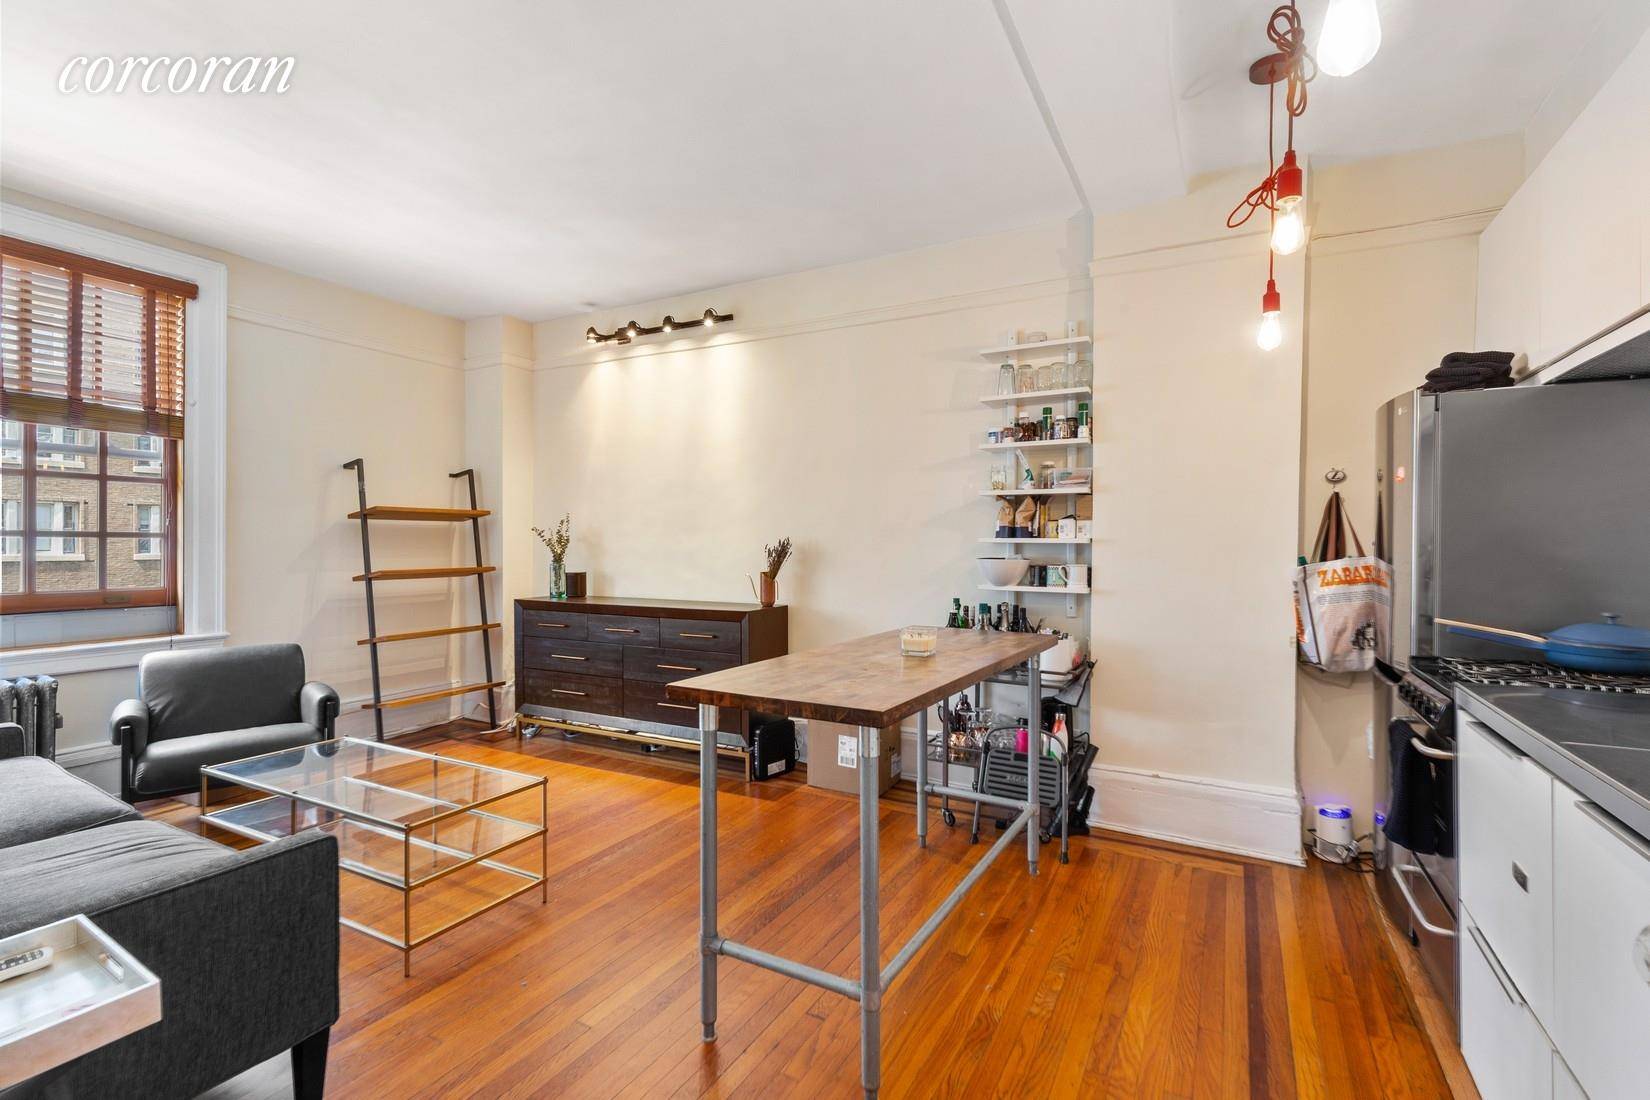 Gorgeous 2 bedroom at the A Britannia CondominiumA, at 110th Street and Broadway, 5 minutes to Columbia University, 1 2 block to the 1 train, 2 blocks to Central Park ...